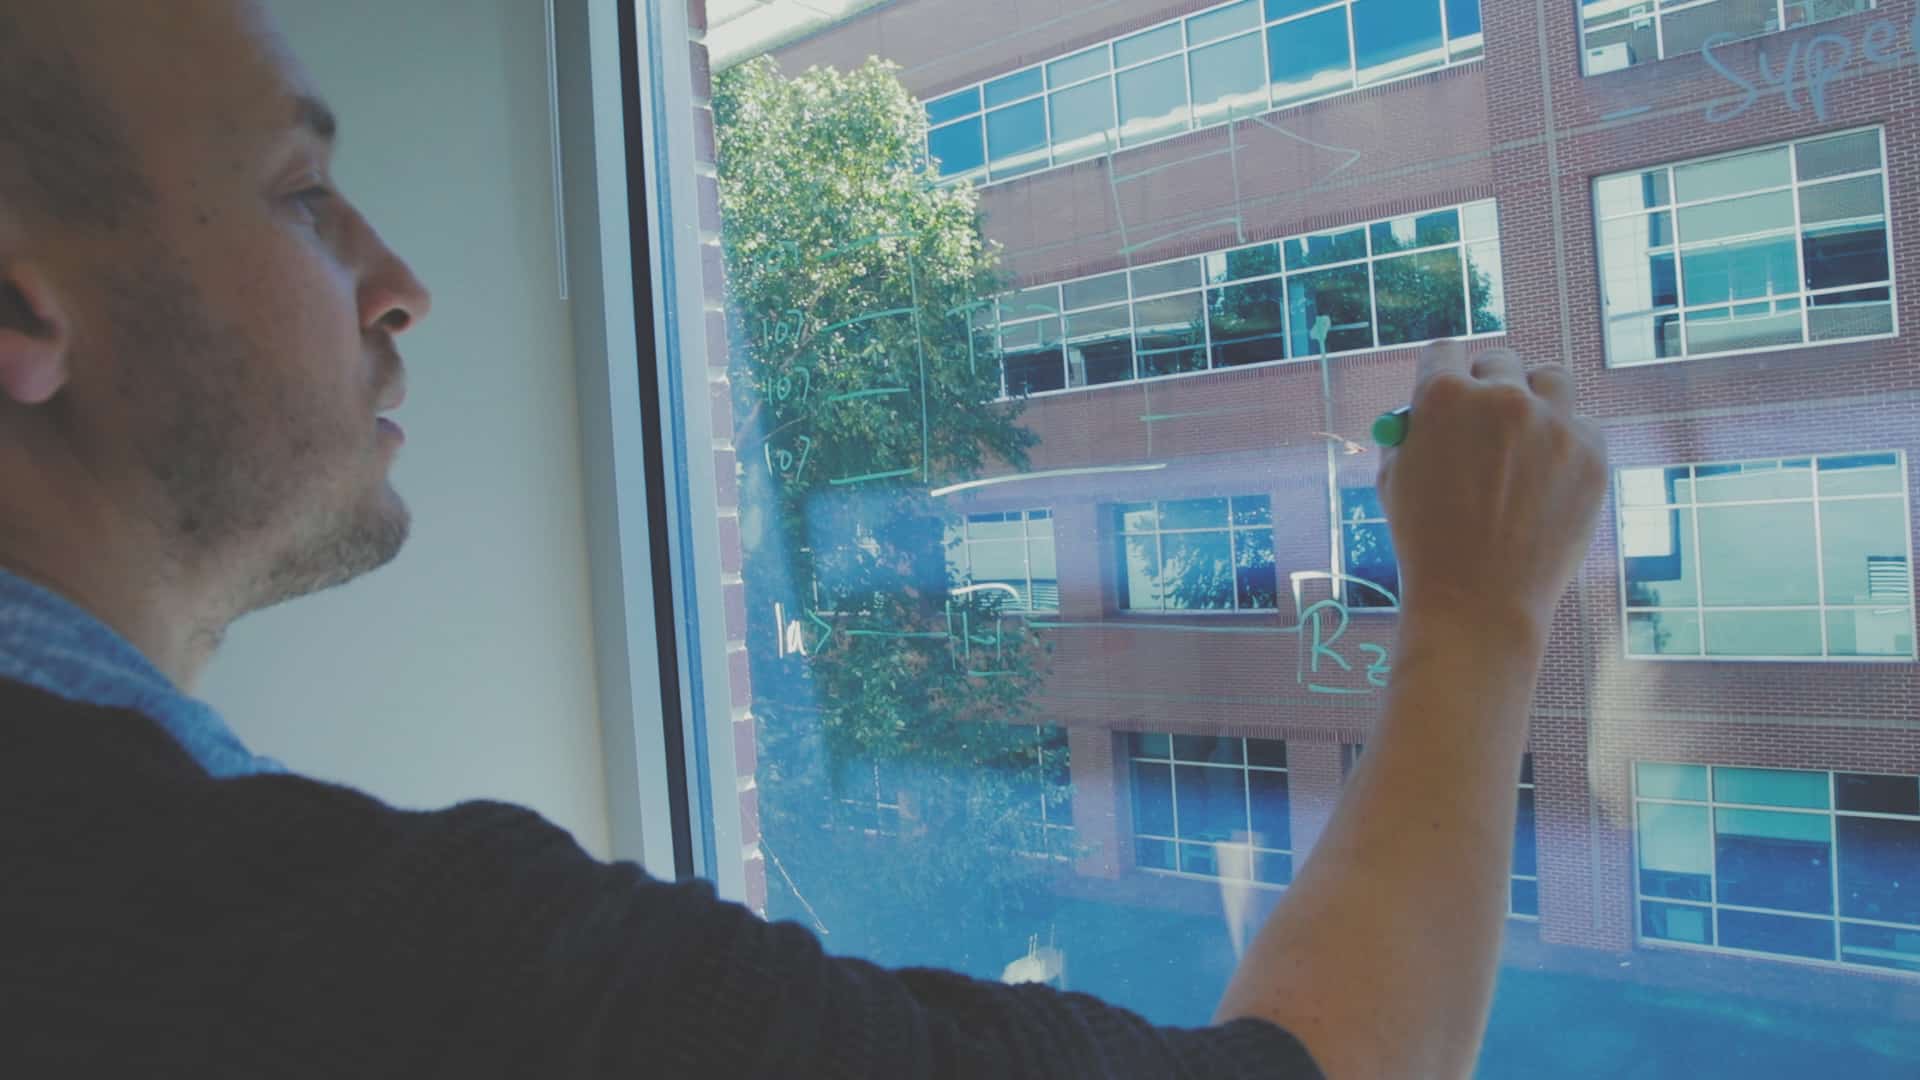 Lex Kemper working out physics equations on a glass window in his office